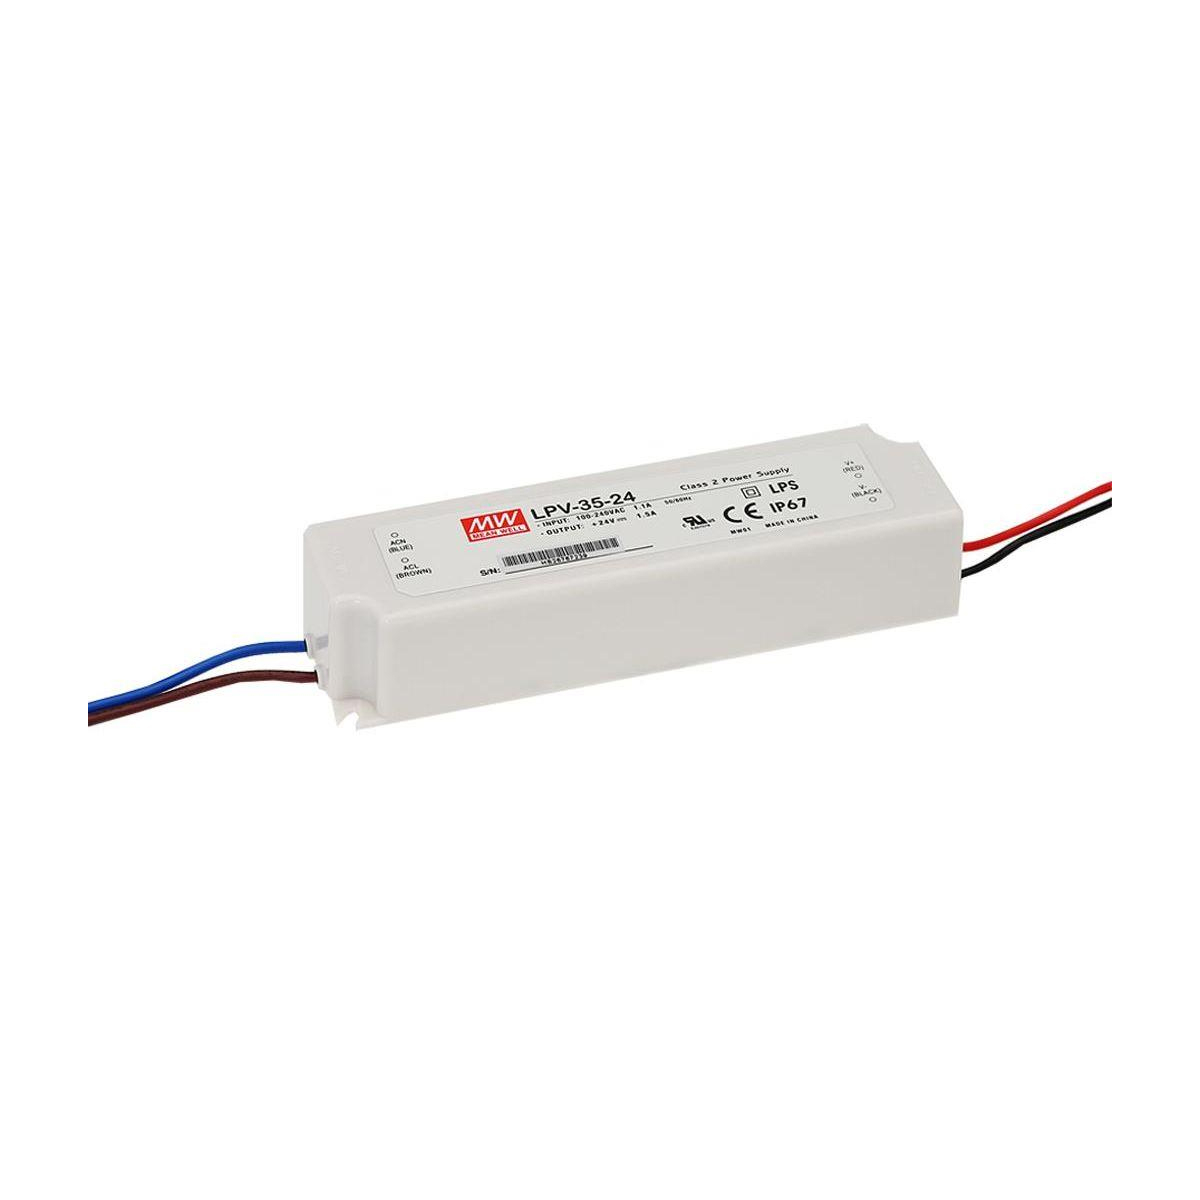 MEAN WELL Power supply 24V DC 35W max. -  IP67  1 output